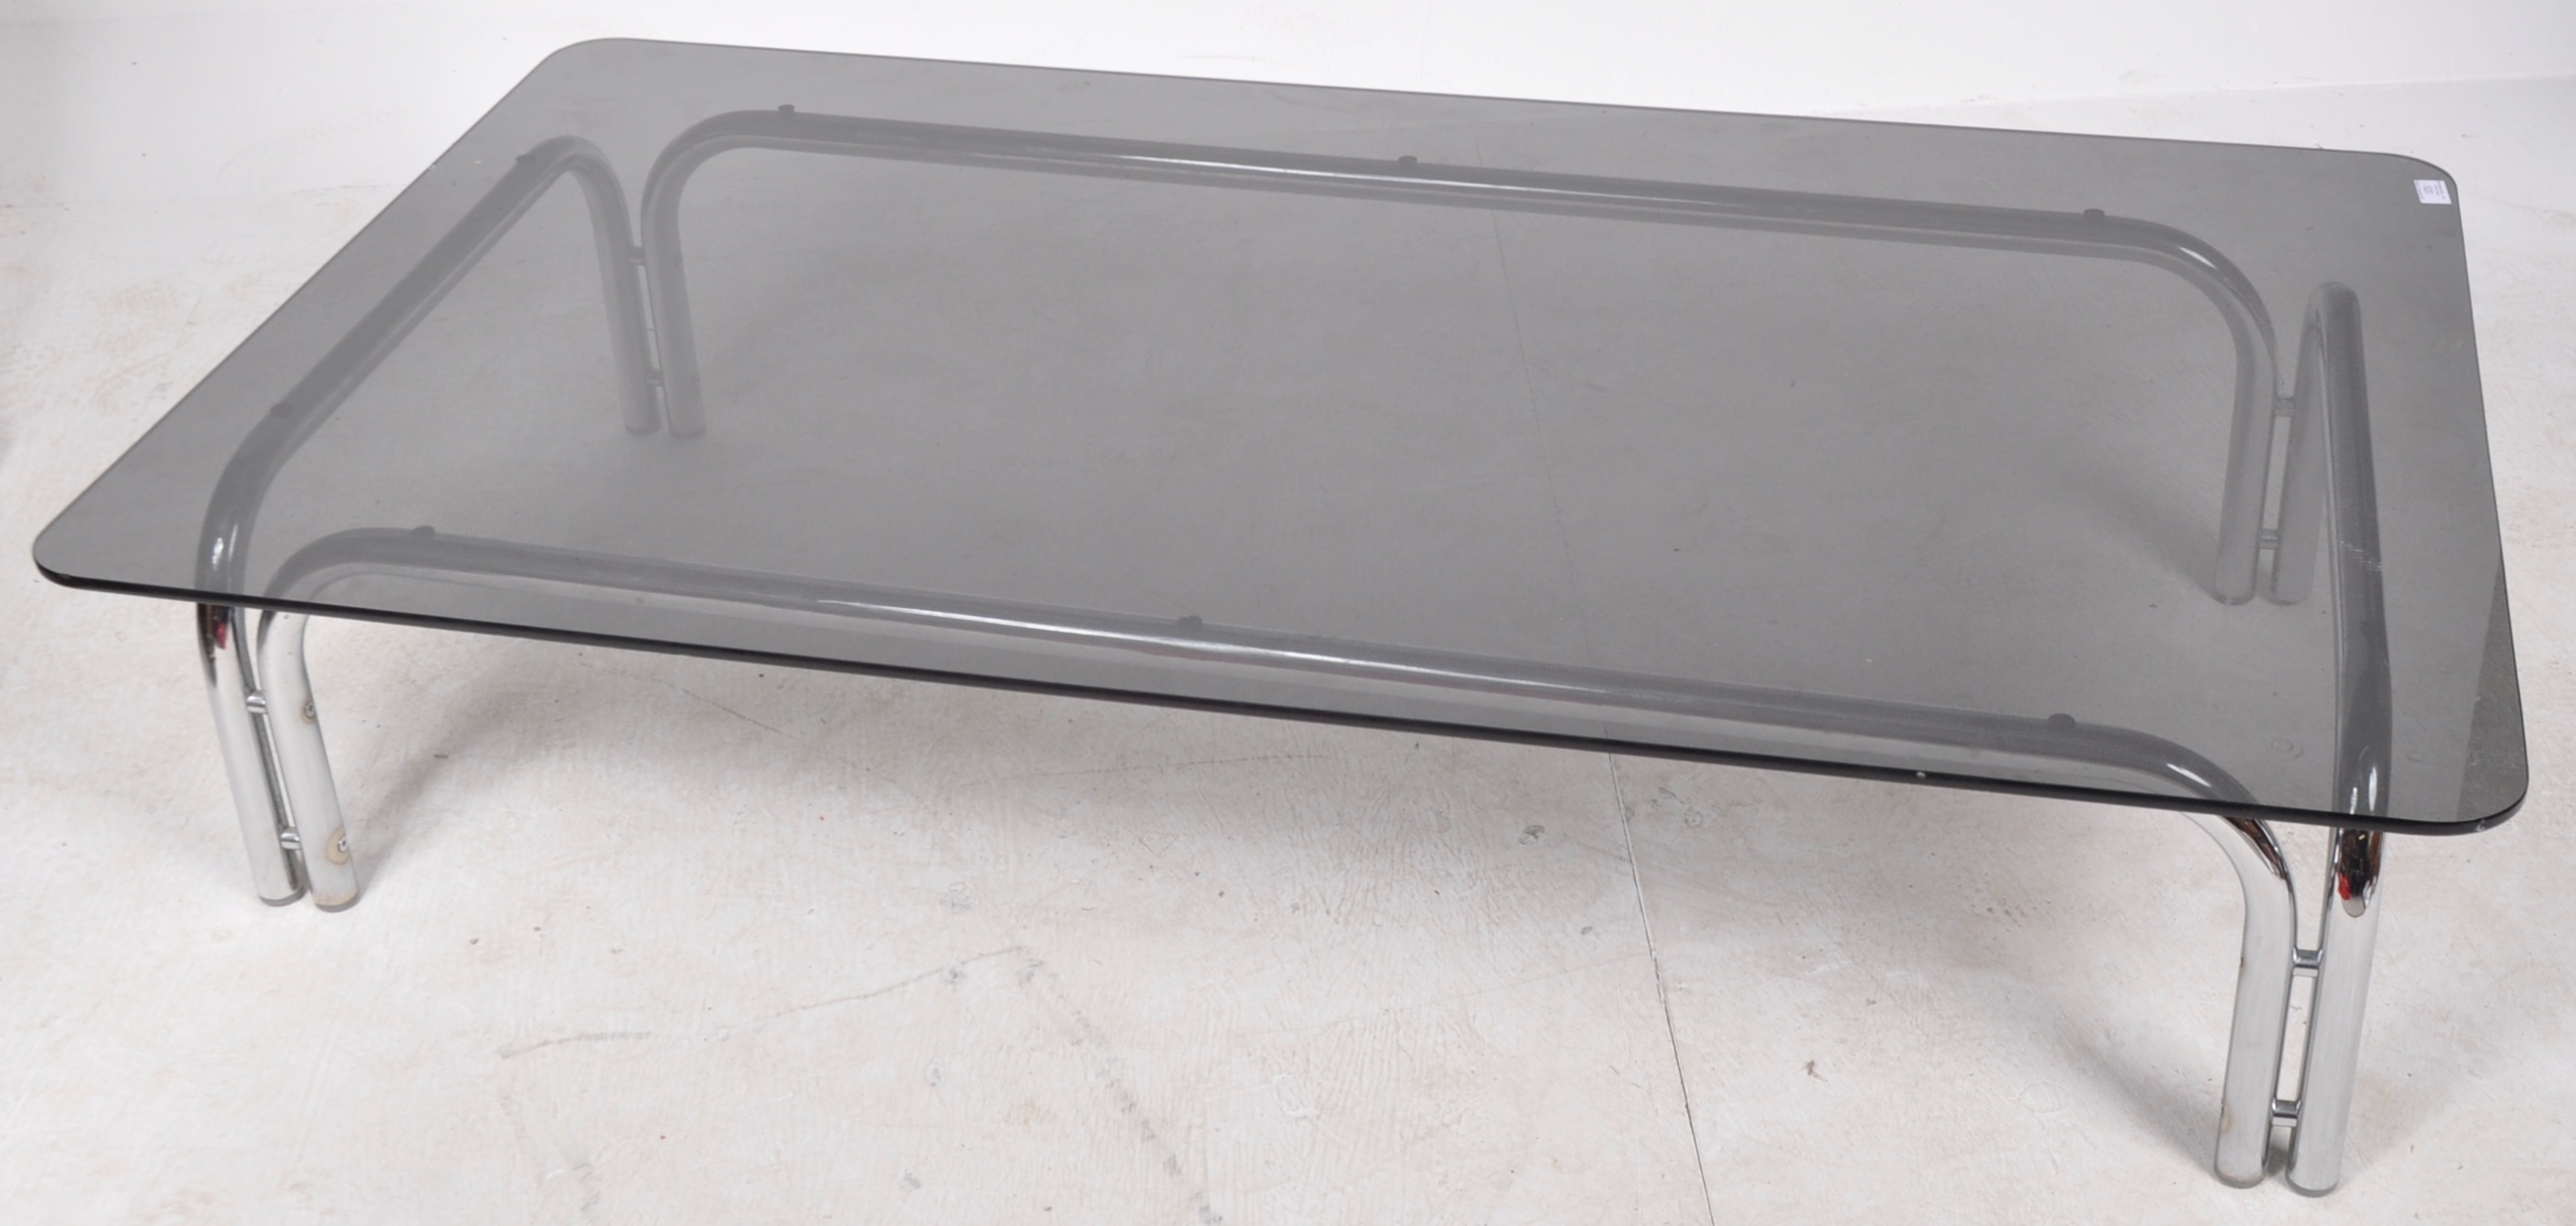 HEALS OF LONDON - LARGE CHROME AND GLASS TOPPED COFFEE TABLE - Image 3 of 6